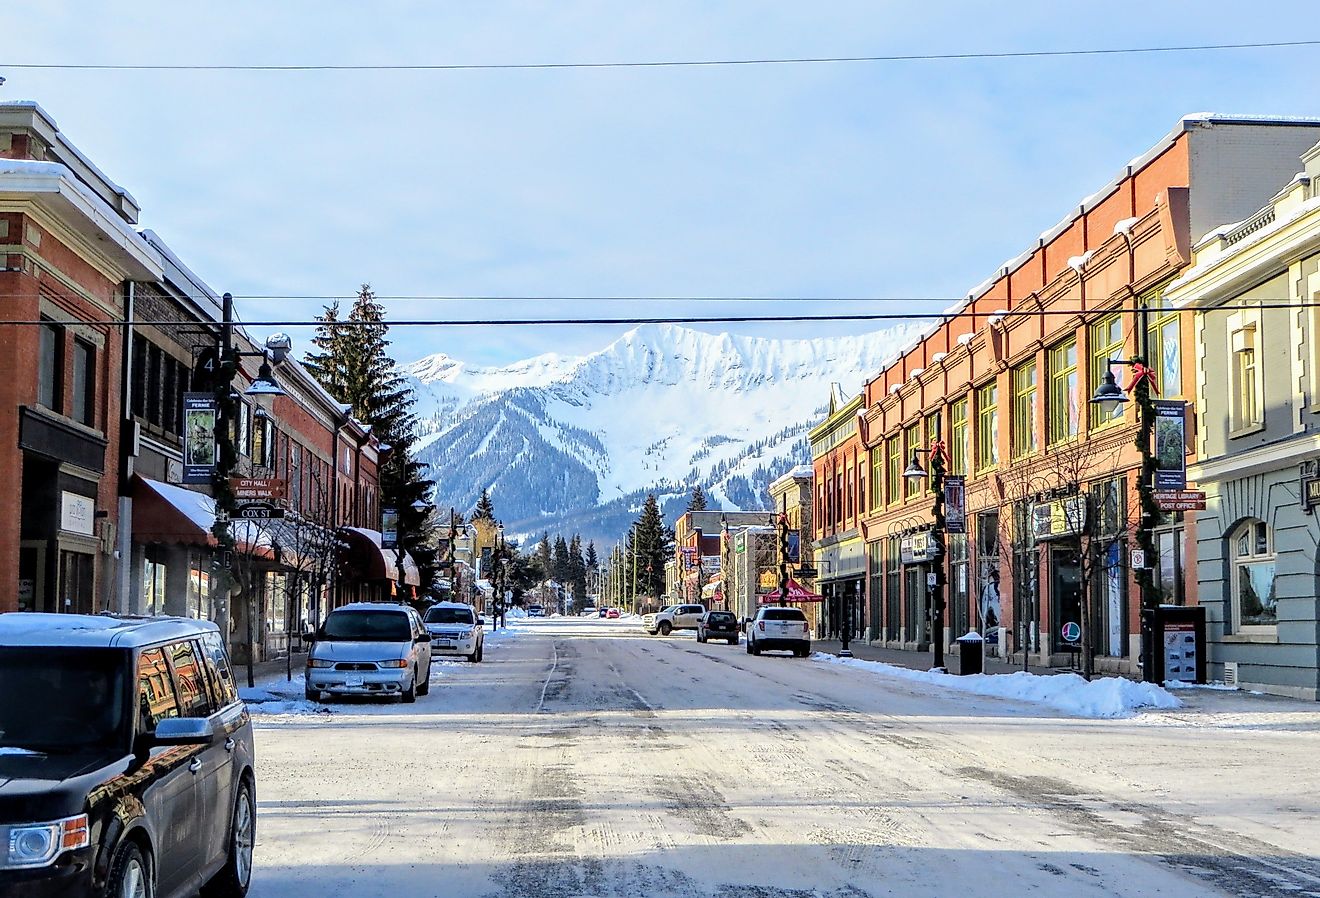  A view down the streets of downtown Fernie, British Columbia, Canada on a sunny morning during the winter. Image credit christopher babcock via Shutterstock.